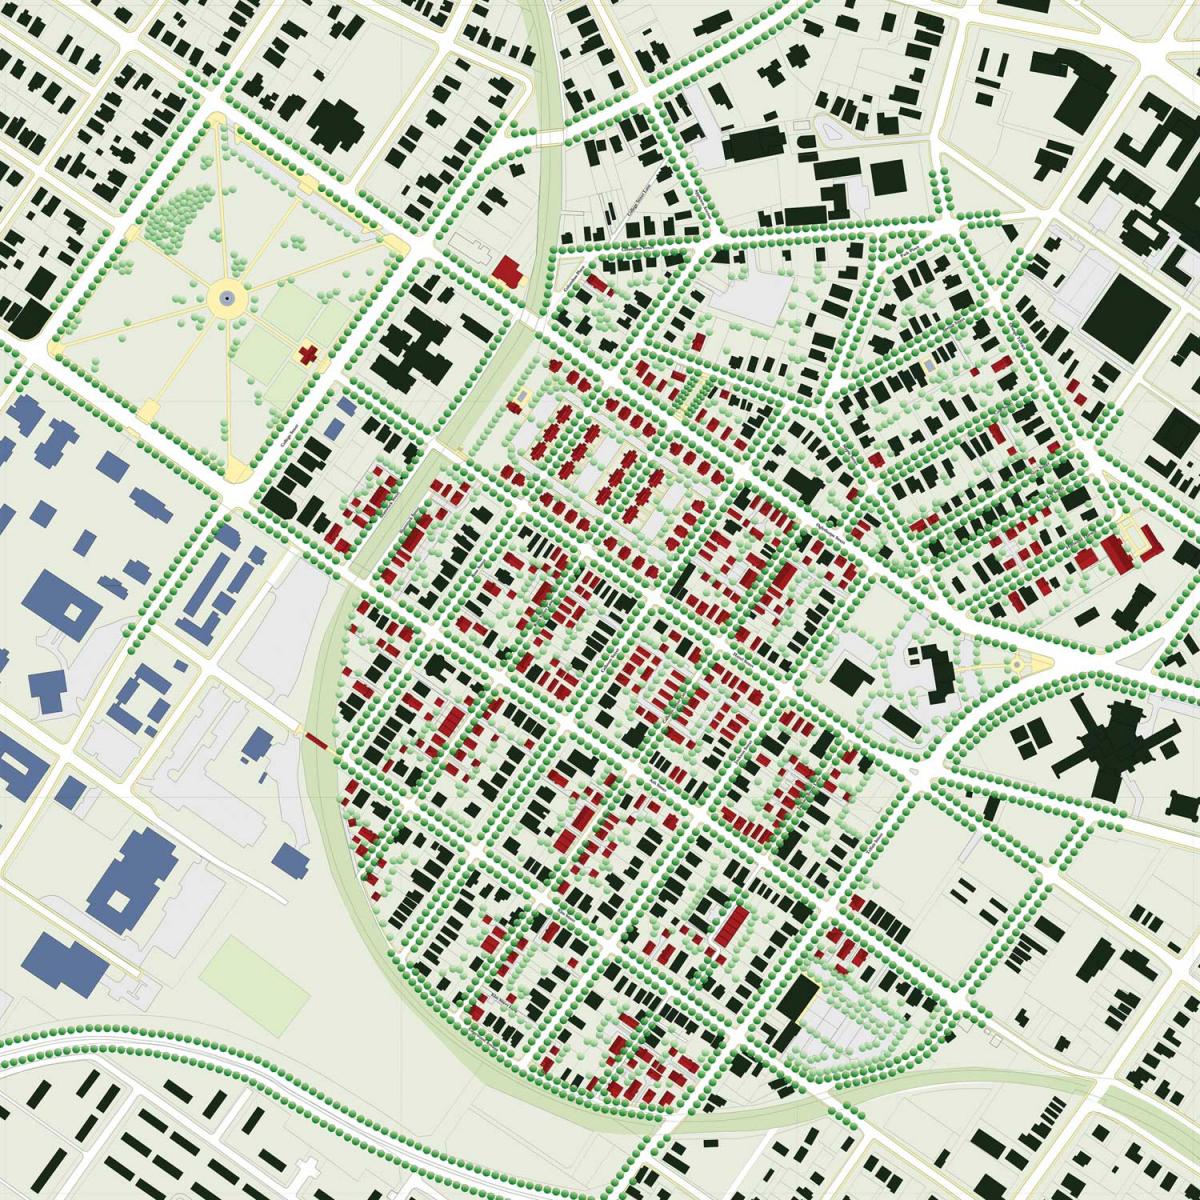 Beall's Hill plan. Existing buildings in black.